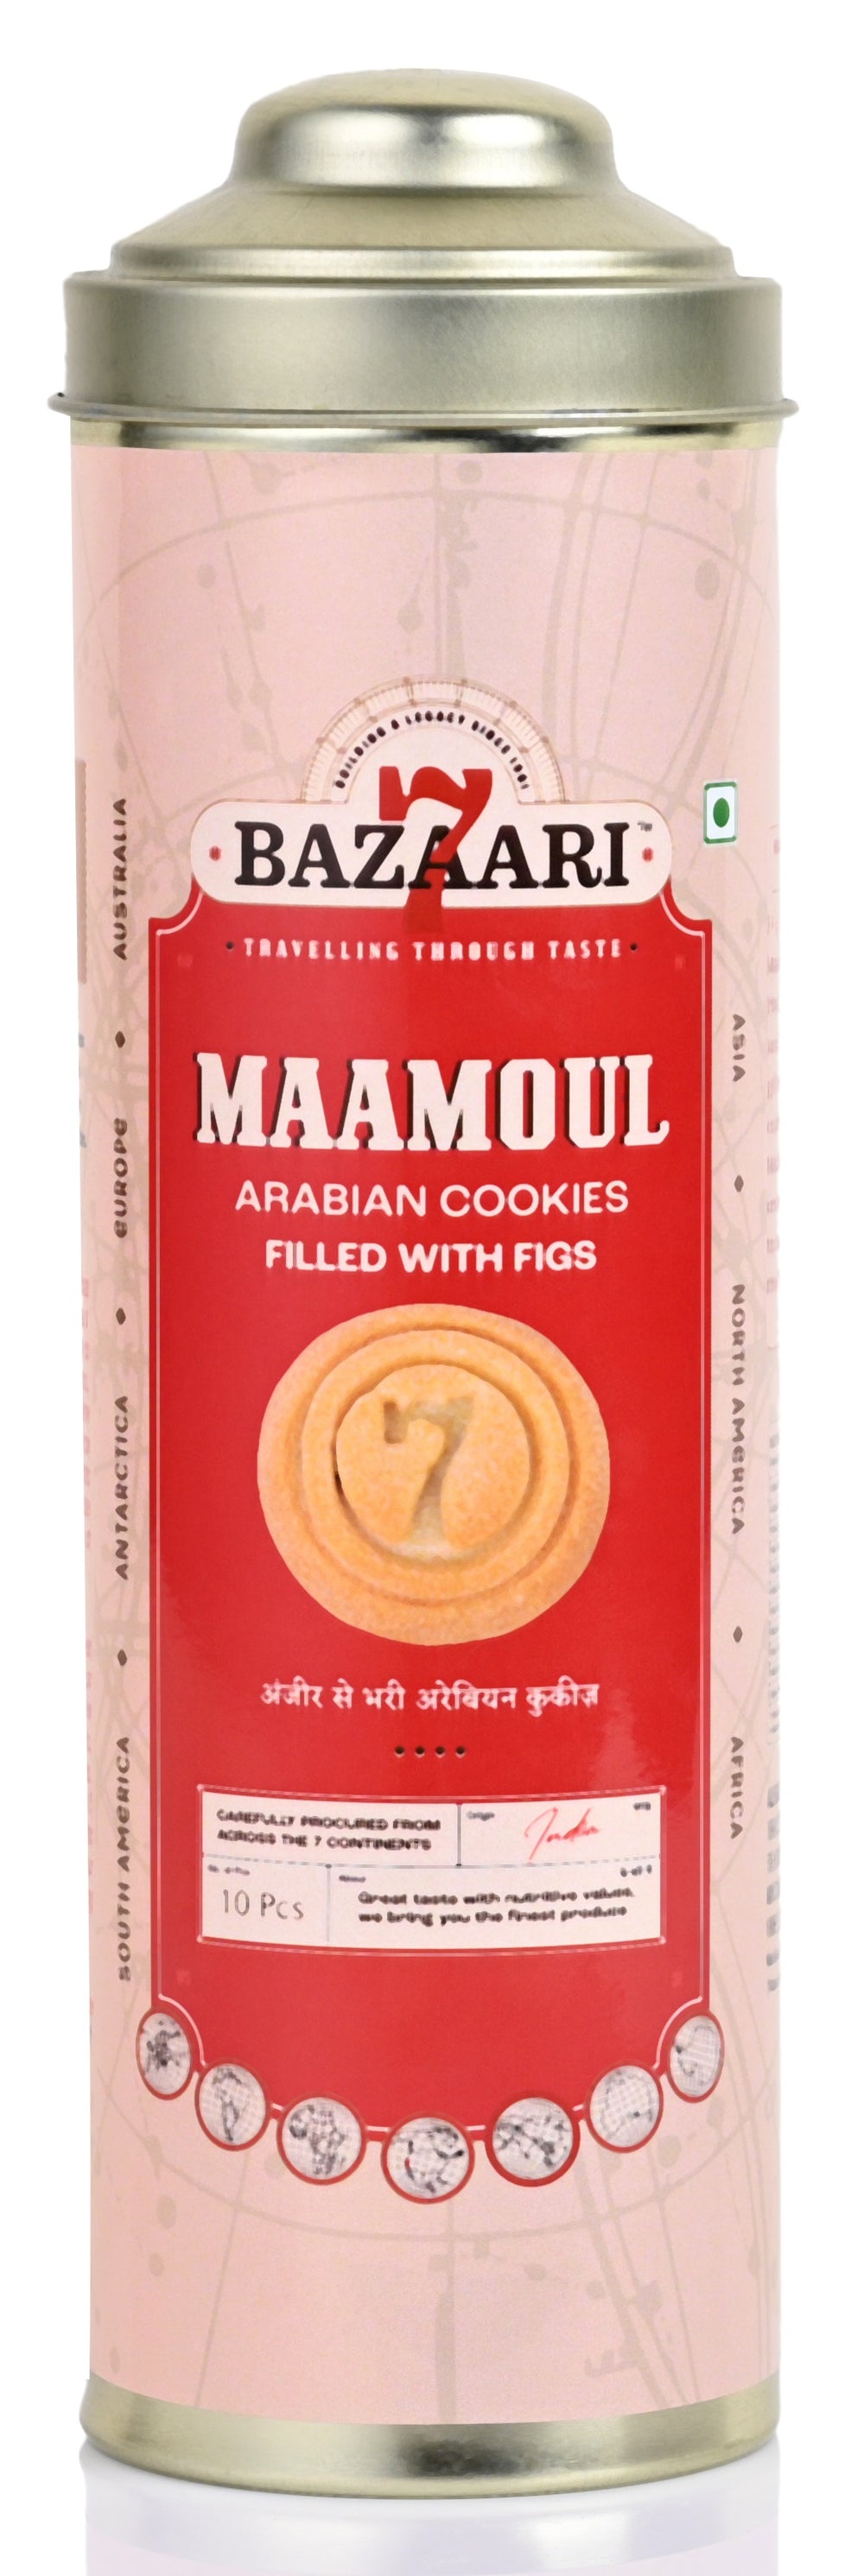 Maamoul With Figs Arabian Short Cakes 10 Pcs